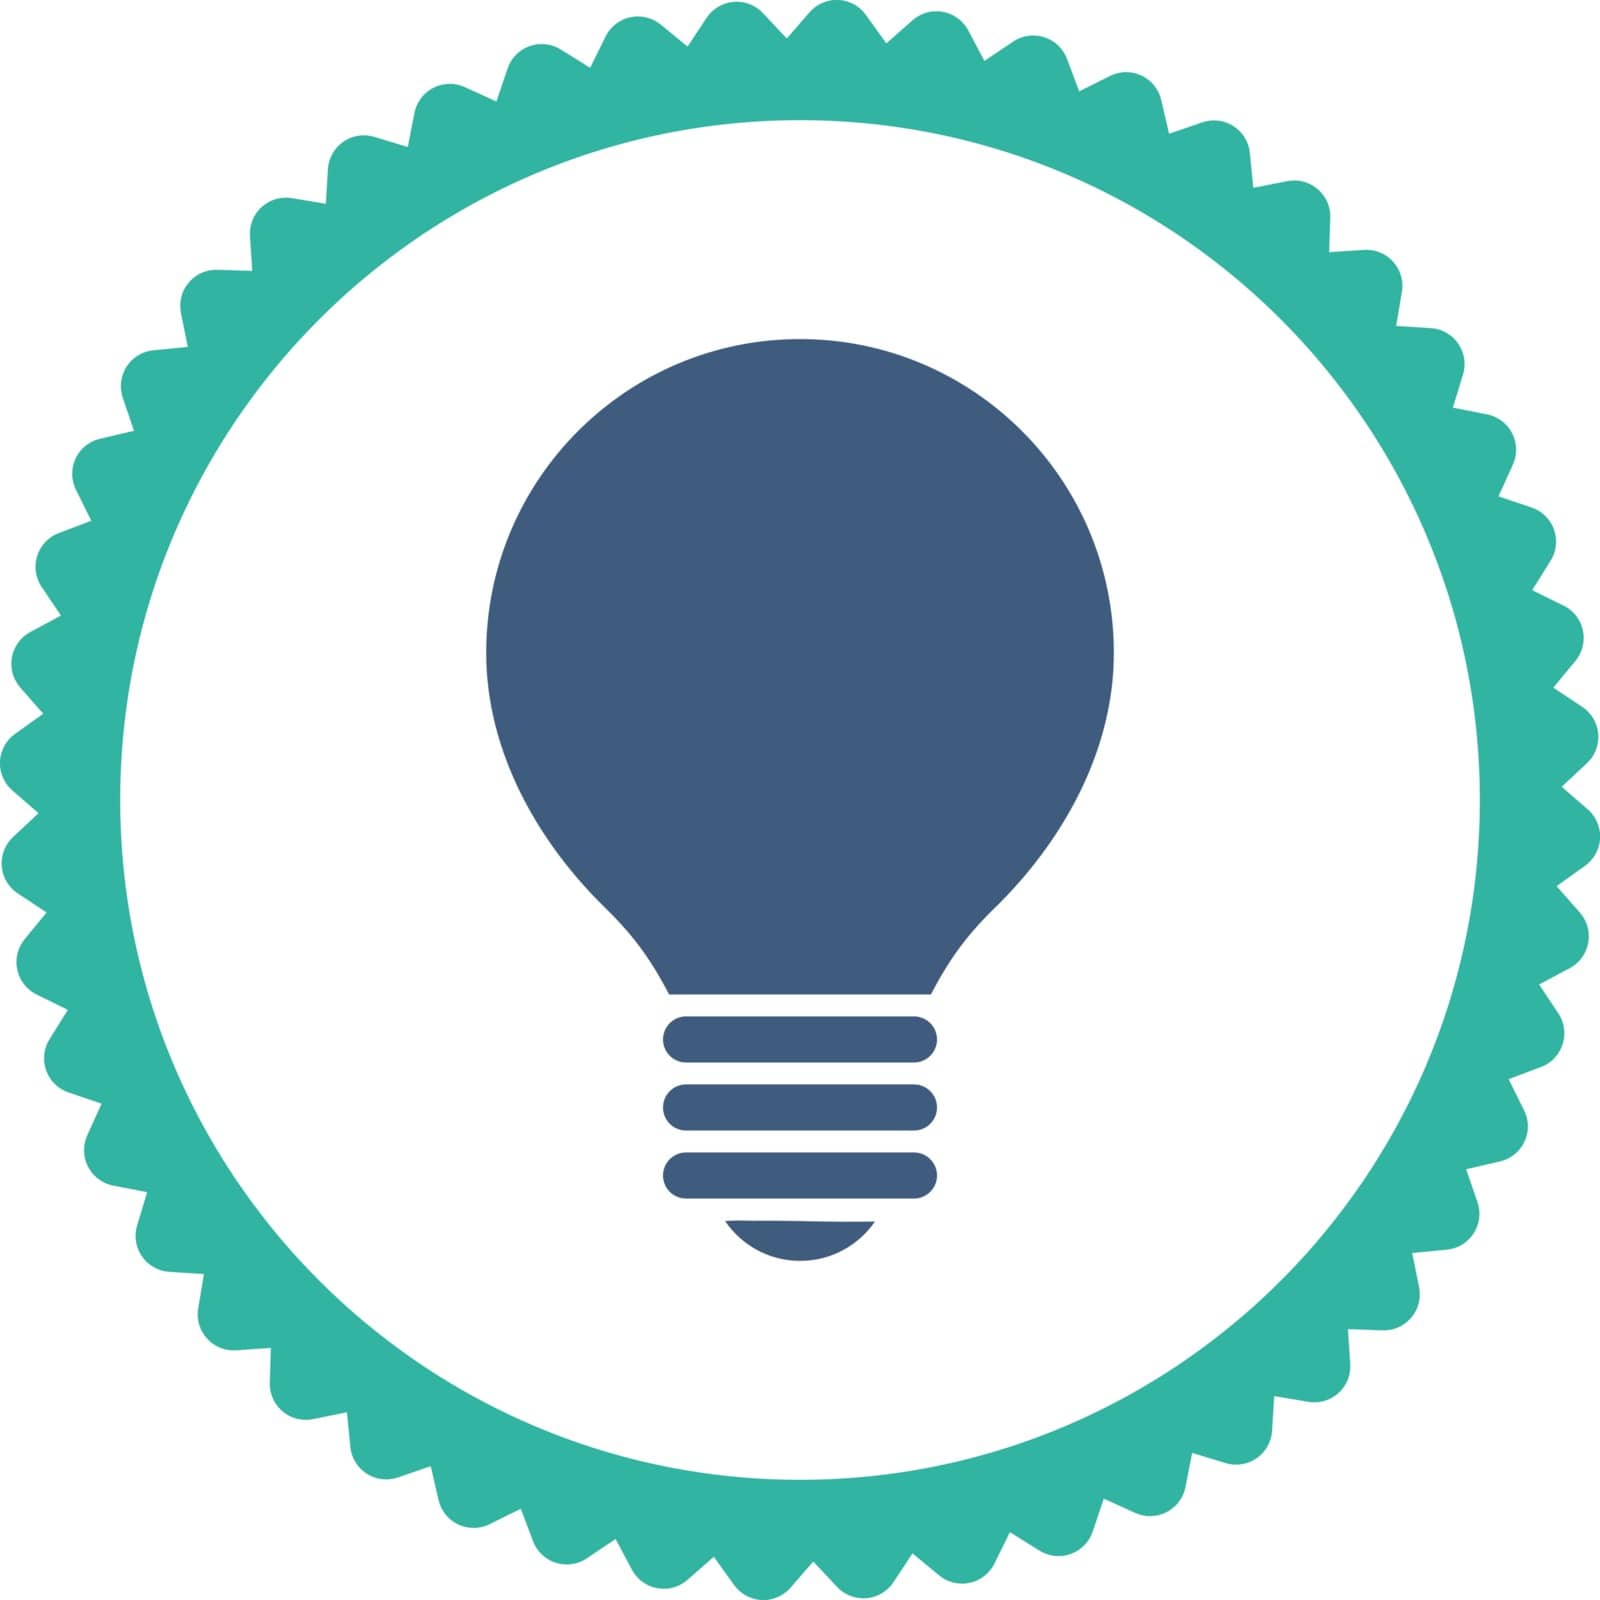 Electric Bulb round stamp icon. This flat vector symbol is drawn with cobalt and cyan colors on a white background.